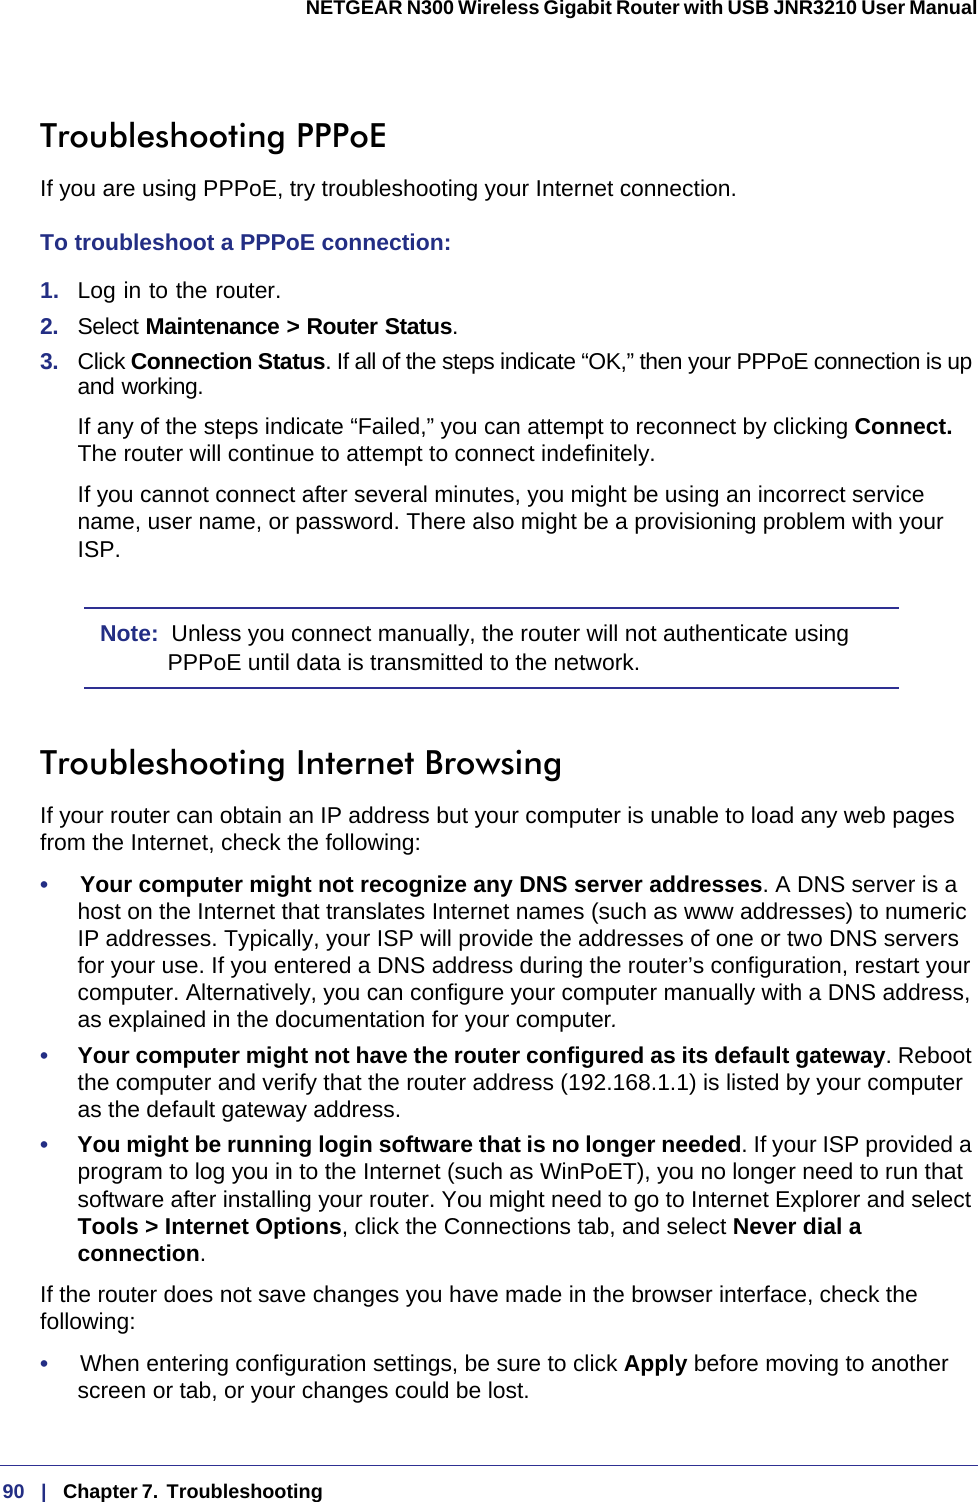 90   |   Chapter 7.  Troubleshooting  NETGEAR N300 Wireless Gigabit Router with USB JNR3210 User Manual Troubleshooting PPPoEIf you are using PPPoE, try troubleshooting your Internet connection.To troubleshoot a PPPoE connection:1.  Log in to the router.2.  Select Maintenance &gt; Router Status.3.  Click Connection Status. If all of the steps indicate “OK,” then your PPPoE connection is up and working.If any of the steps indicate “Failed,” you can attempt to reconnect by clicking Connect. The router will continue to attempt to connect indefinitely.If you cannot connect after several minutes, you might be using an incorrect service name, user name, or password. There also might be a provisioning problem with your ISP.Note:  Unless you connect manually, the router will not authenticate using PPPoE until data is transmitted to the network.Troubleshooting Internet BrowsingIf your router can obtain an IP address but your computer is unable to load any web pages from the Internet, check the following:•     Your computer might not recognize any DNS server addresses. A DNS server is a host on the Internet that translates Internet names (such as www addresses) to numeric IP  addresses. Typically, your ISP will provide the addresses of one or two DNS servers for your use. If you entered a DNS address during the router’s configuration, restart your computer. Alternatively, you can configure your computer manually with a DNS address, as explained in the documentation for your computer.•     Your computer might not have the router configured as its default gateway. Reboot the computer and verify that the router address (192.168.1.1) is listed by your computer as the default gateway address.•     You might be running login software that is no longer needed. If your ISP provided a program to log you in to the Internet (such as WinPoET), you no longer need to run that software after installing your router. You might need to go to Internet Explorer and select Tools &gt; Internet Options, click the Connections tab, and select Never dial a connection.If the router does not save changes you have made in the browser interface, check the following:•     When entering configuration settings, be sure to click Apply before moving to another screen or tab, or your changes could be lost. 